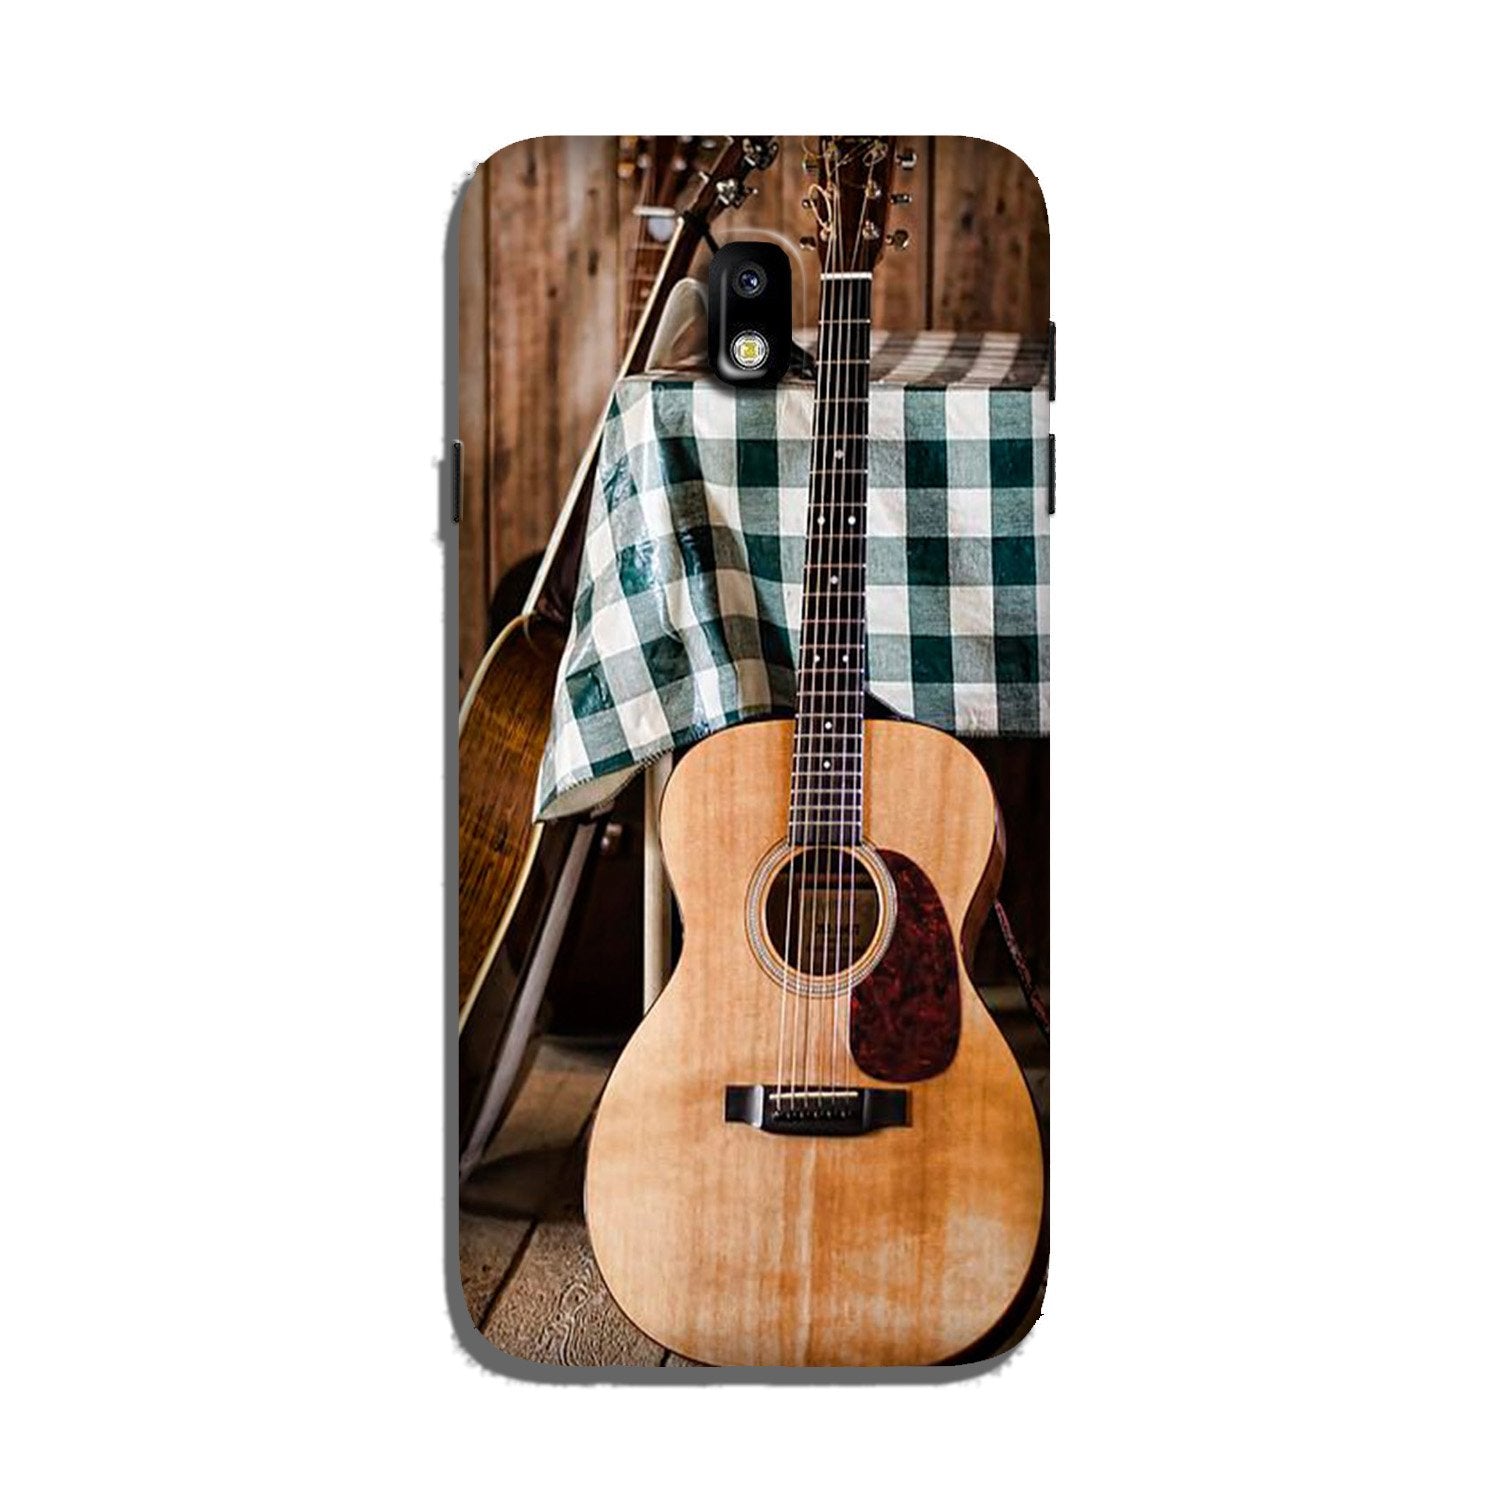 Guitar2 Case for Galaxy J5 Pro